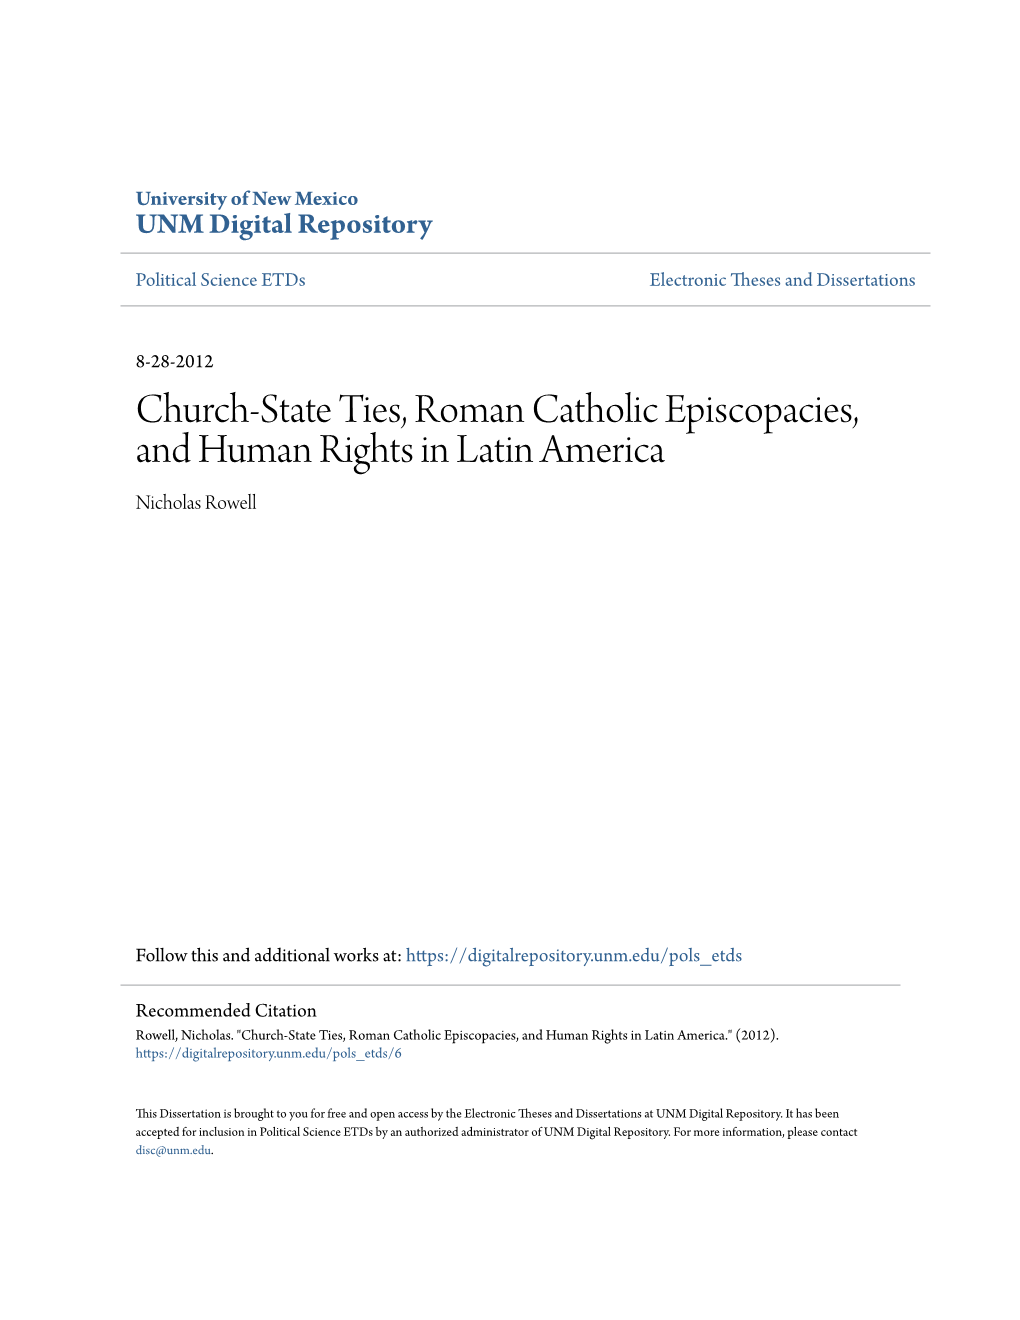 Church-State Ties, Roman Catholic Episcopacies, and Human Rights in Latin America Nicholas Rowell